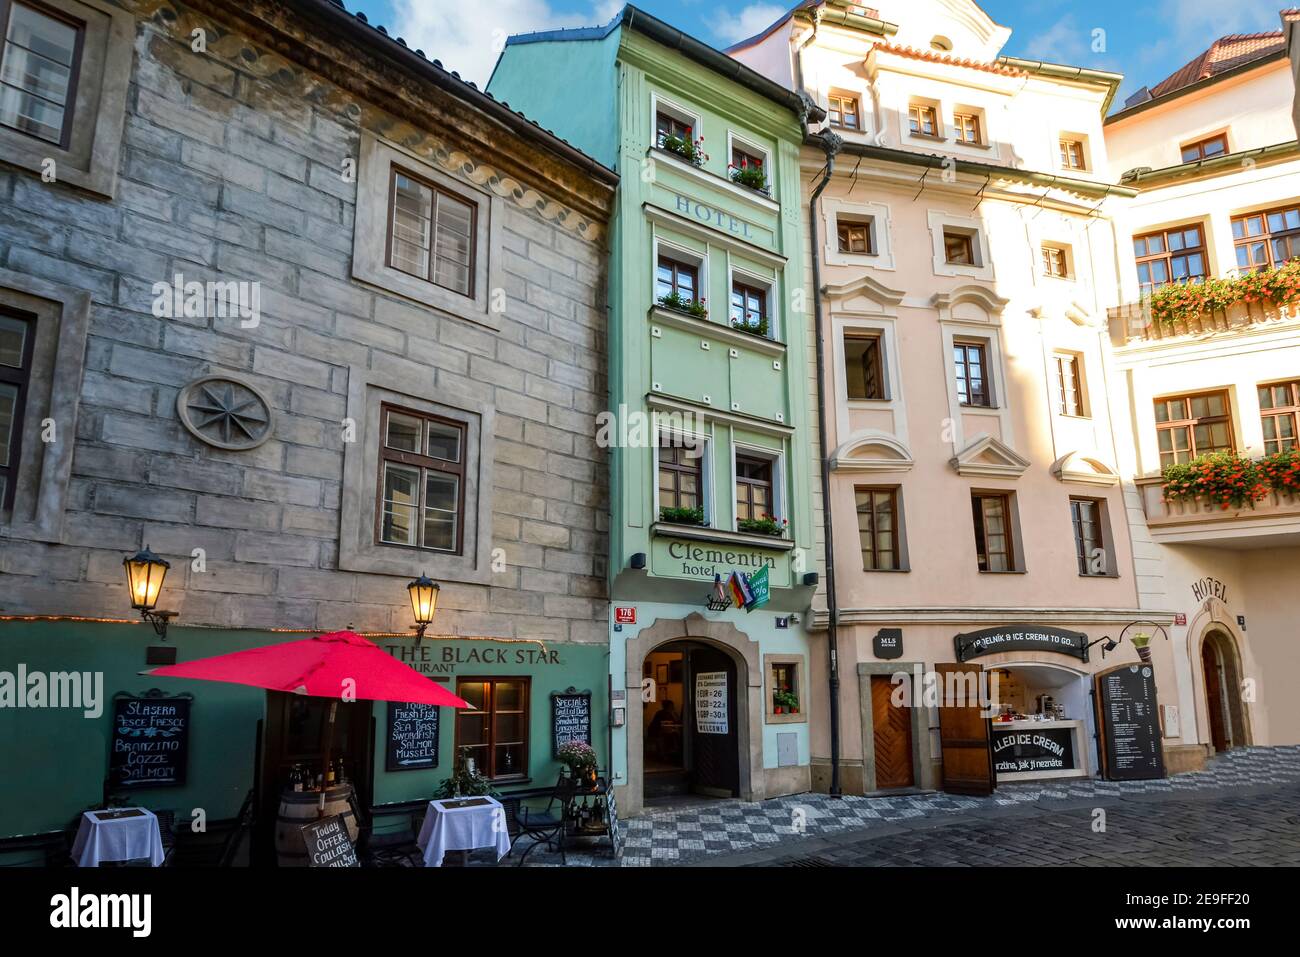 A typical row of cafes and hotels in the historic center of Old Town Prague, Czechia. Stock Photo